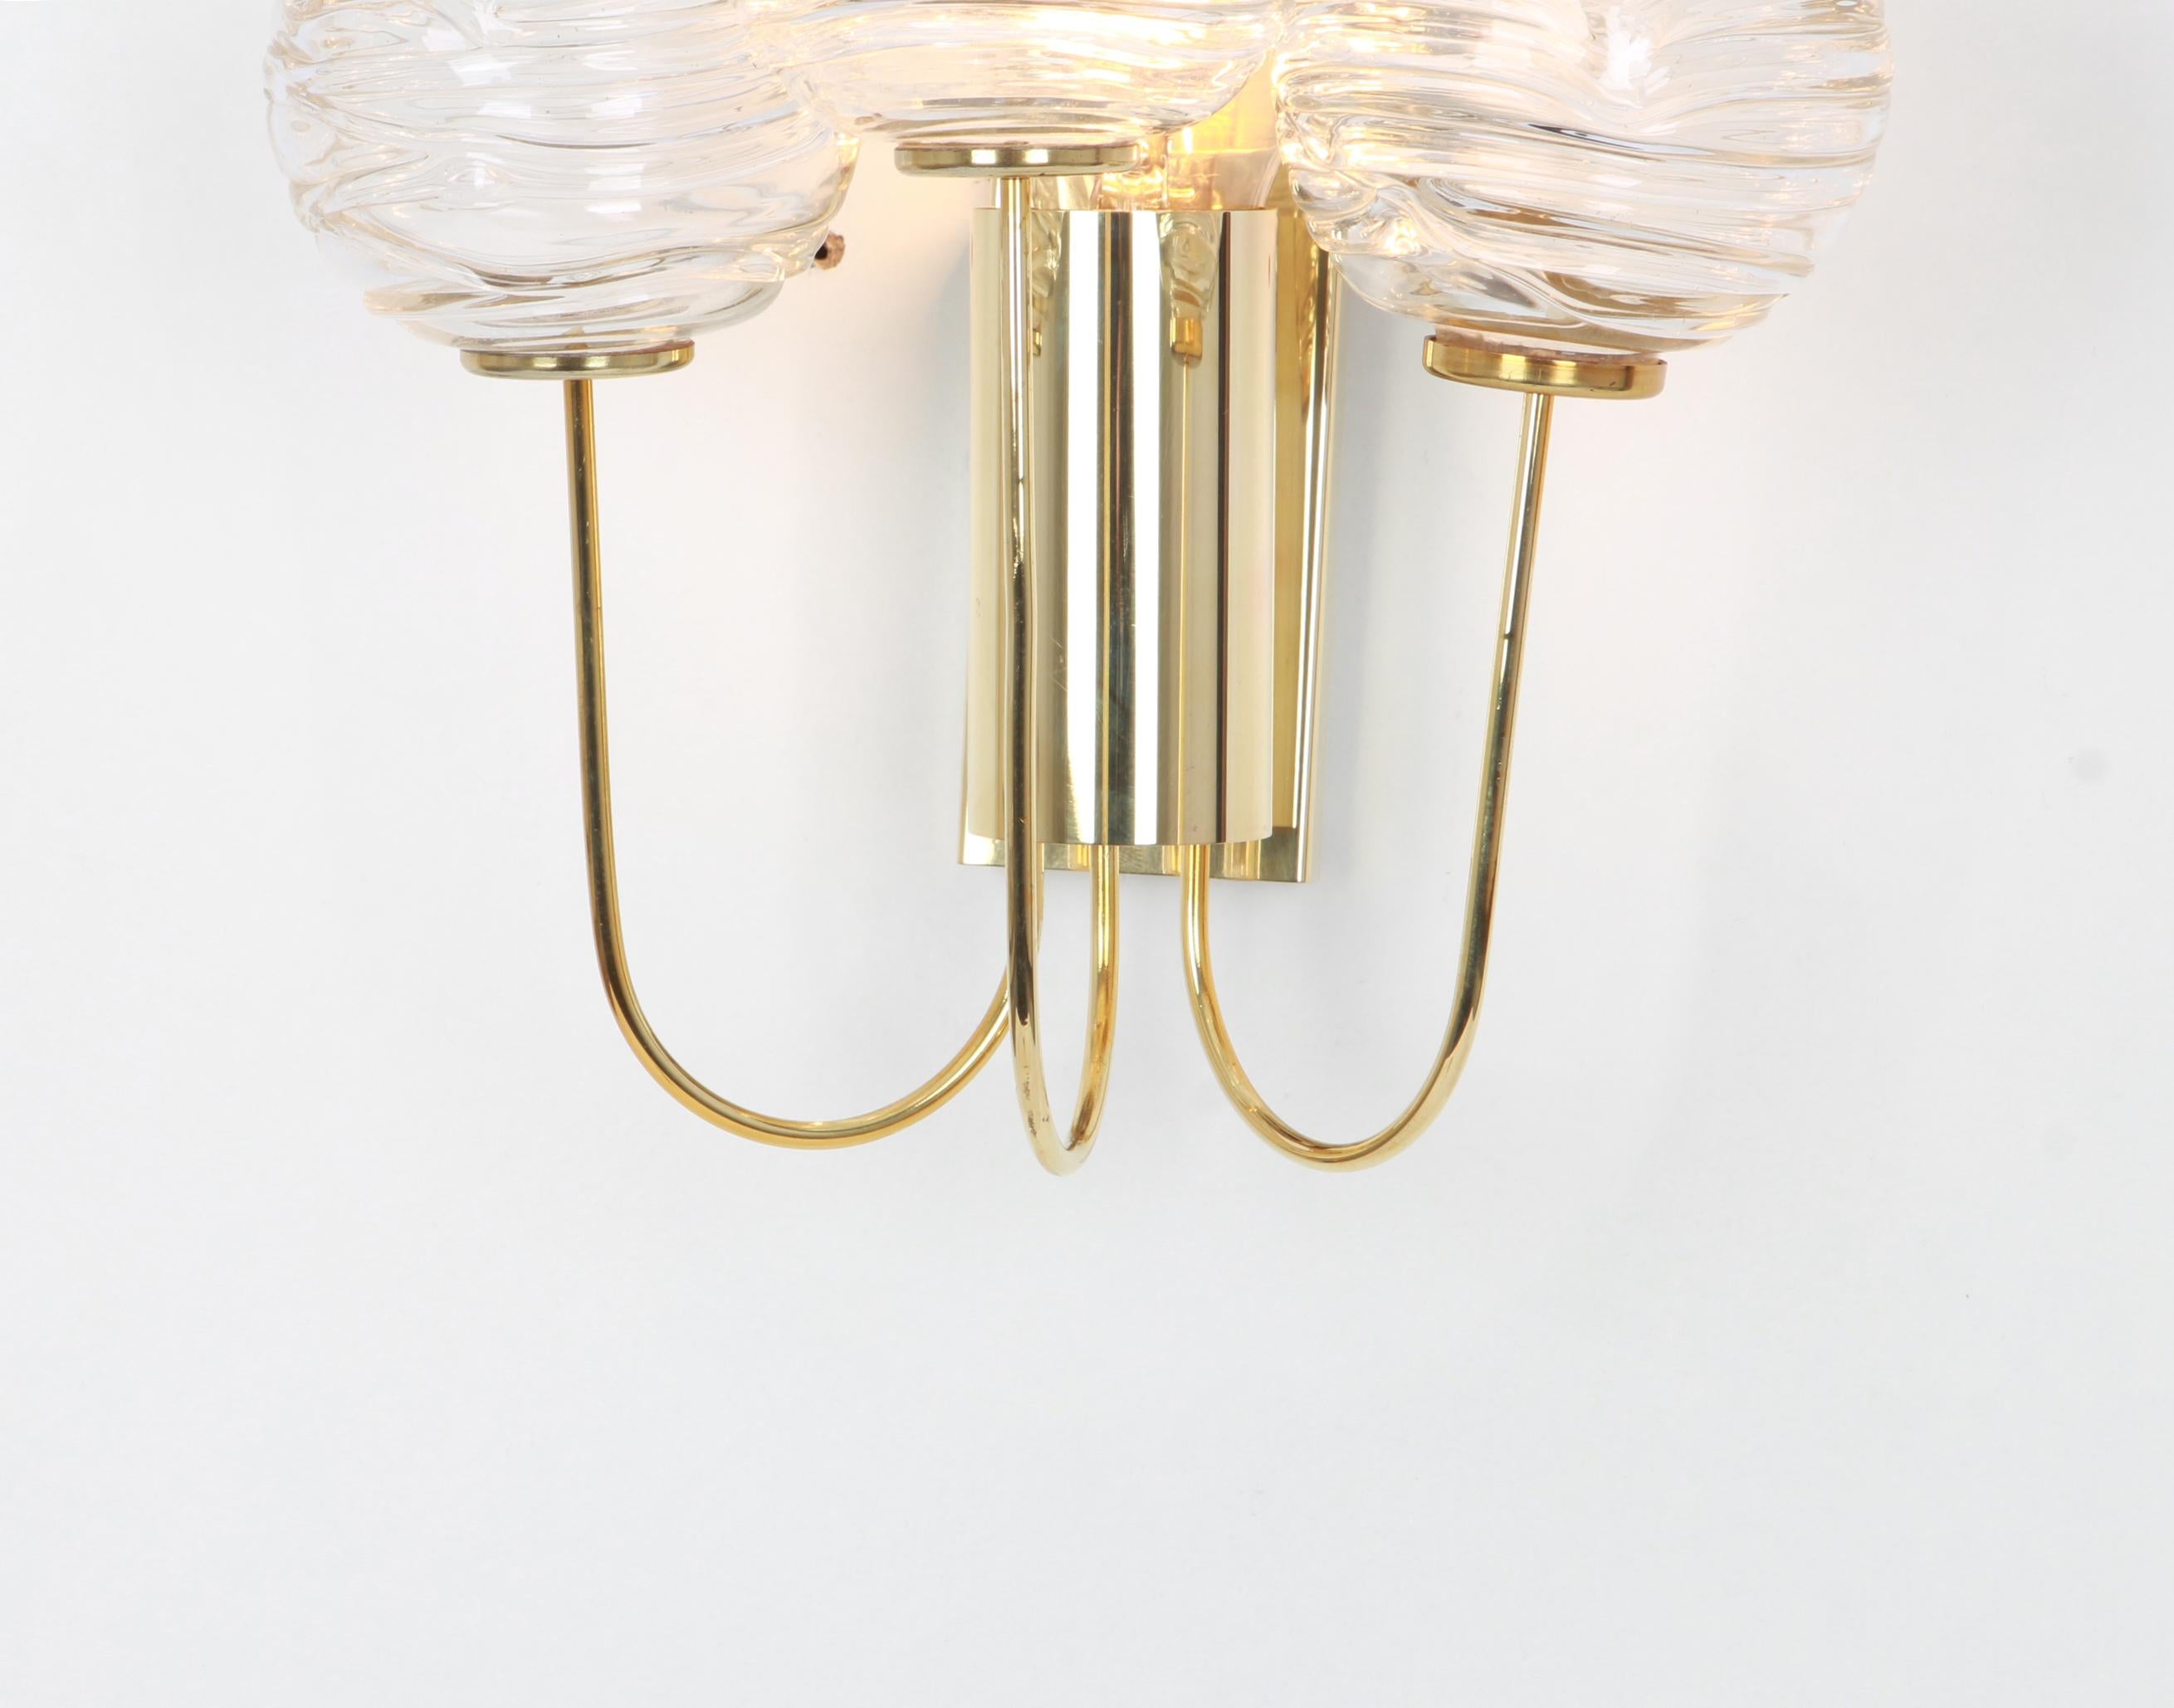 Pair of Rare Sputnik Brass and Murano Glass Wall Sconces by Doria, Germany, 1960 For Sale 1